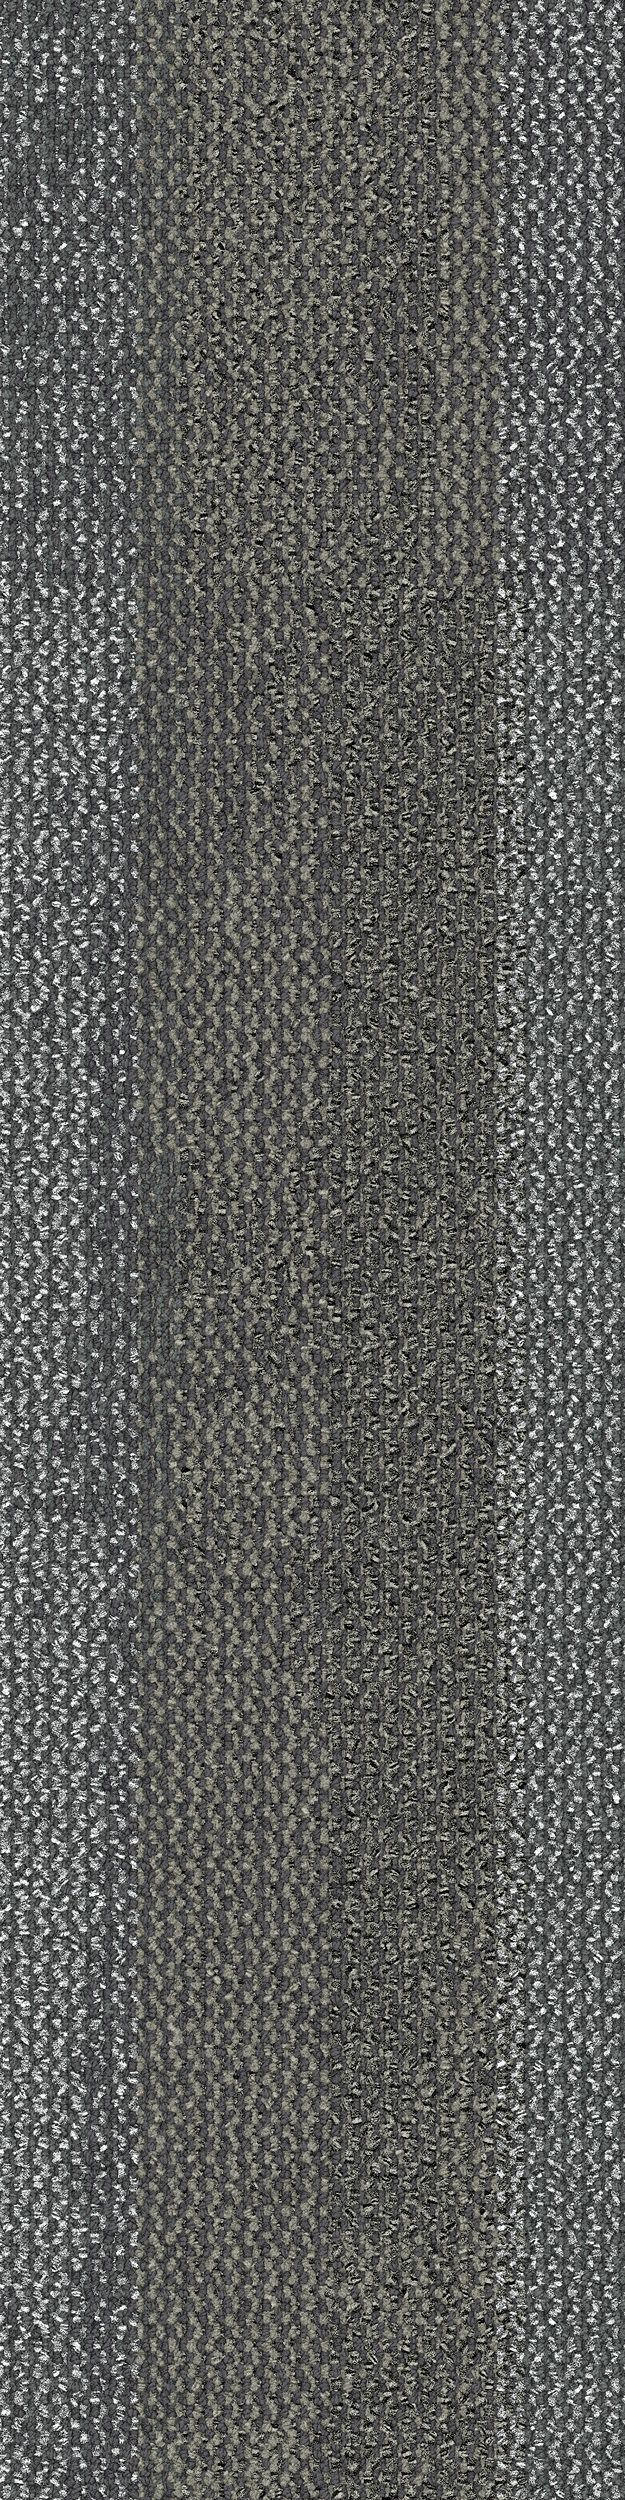 Naturally Weather Carpet Tile In Wrought Iron numéro d’image 3